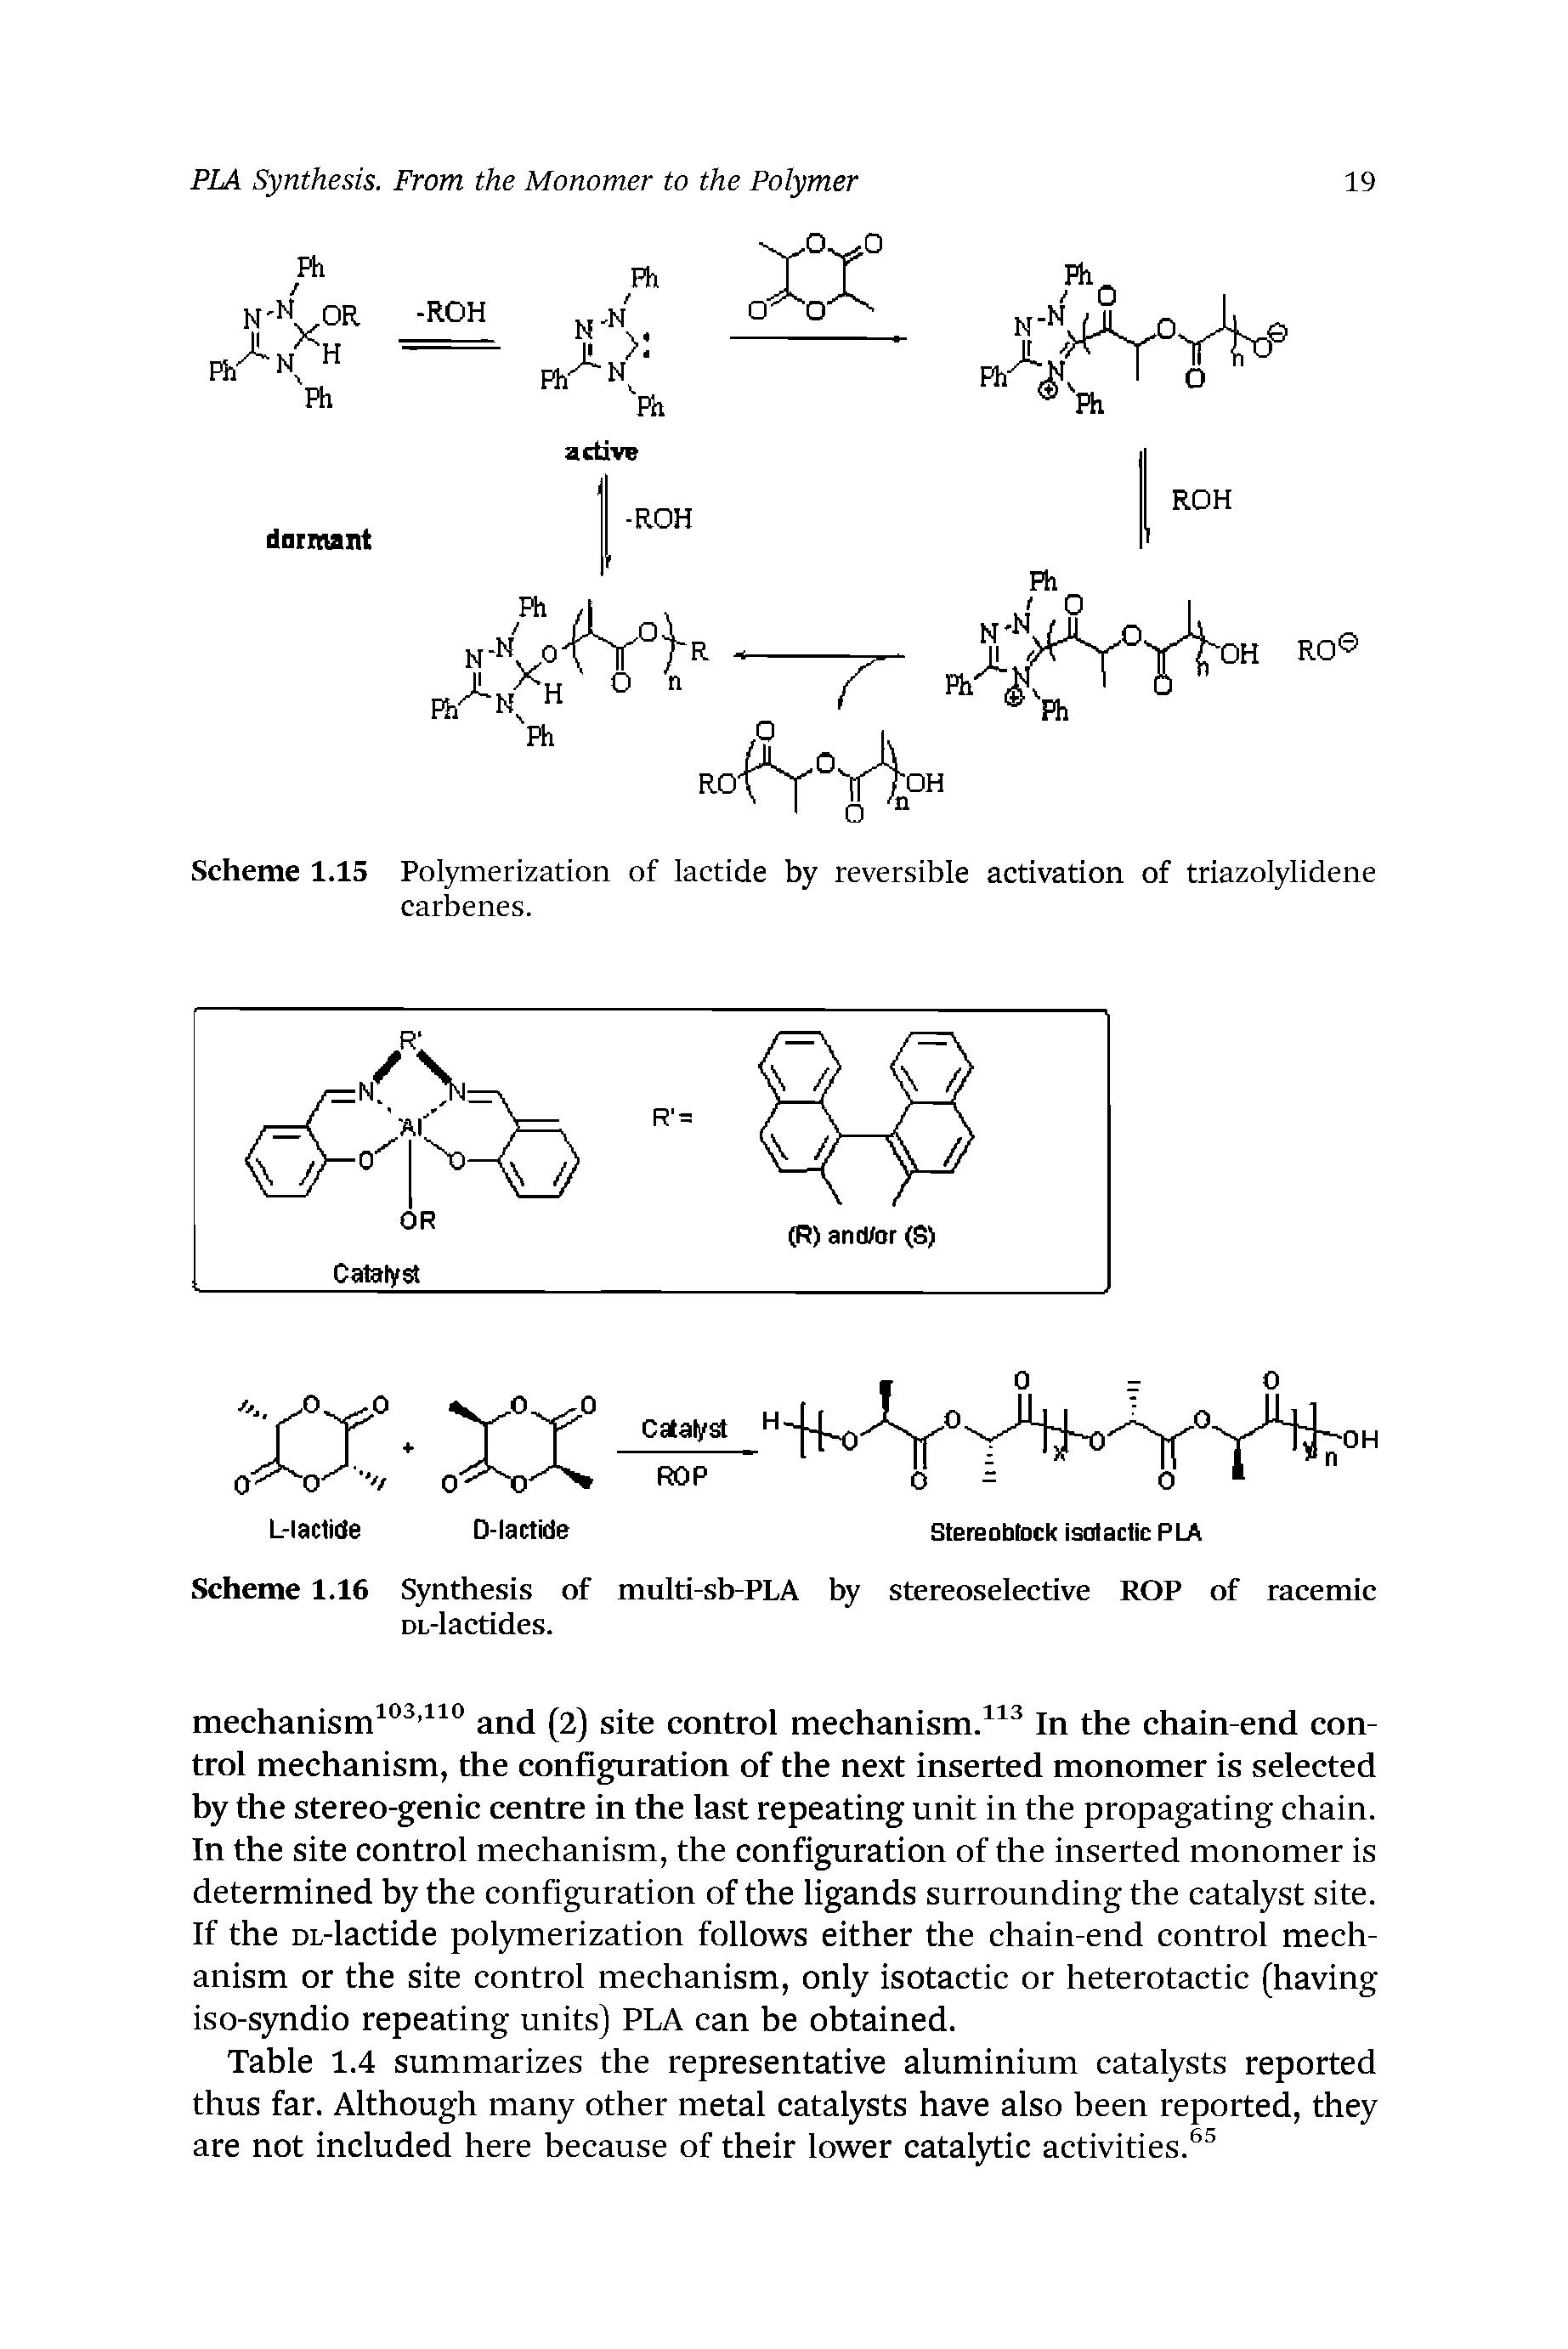 Scheme 1.15 Polymerization of lactide by reversible activation of triazolylidene carbenes.